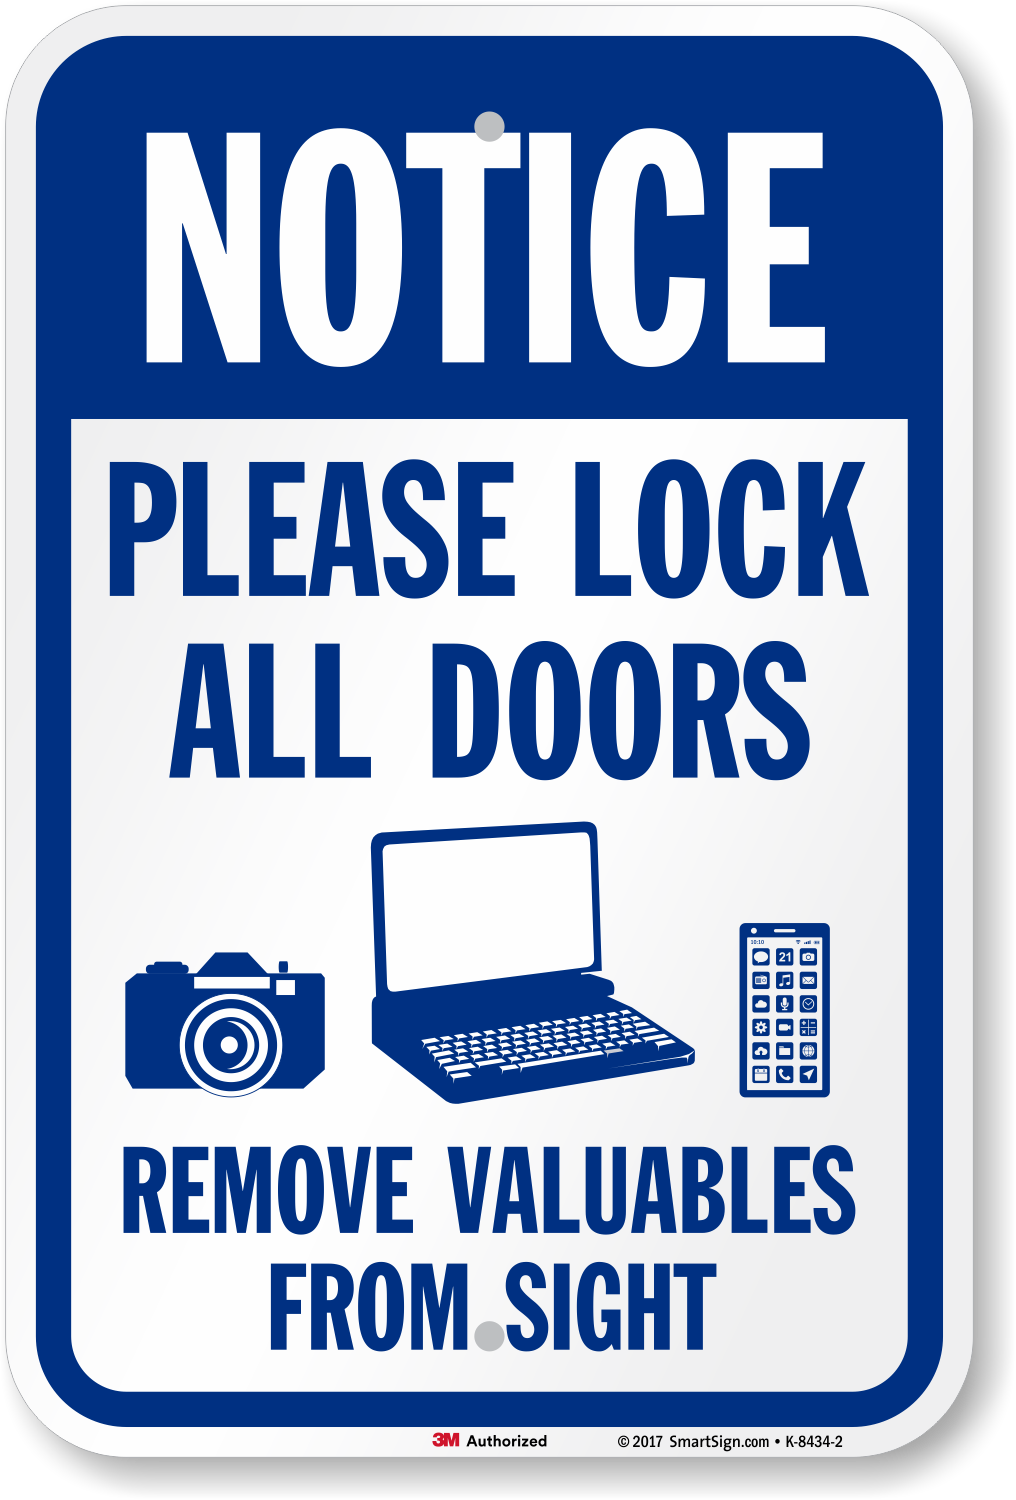 Reminding people to lock door and not leave valuables. Wonder what